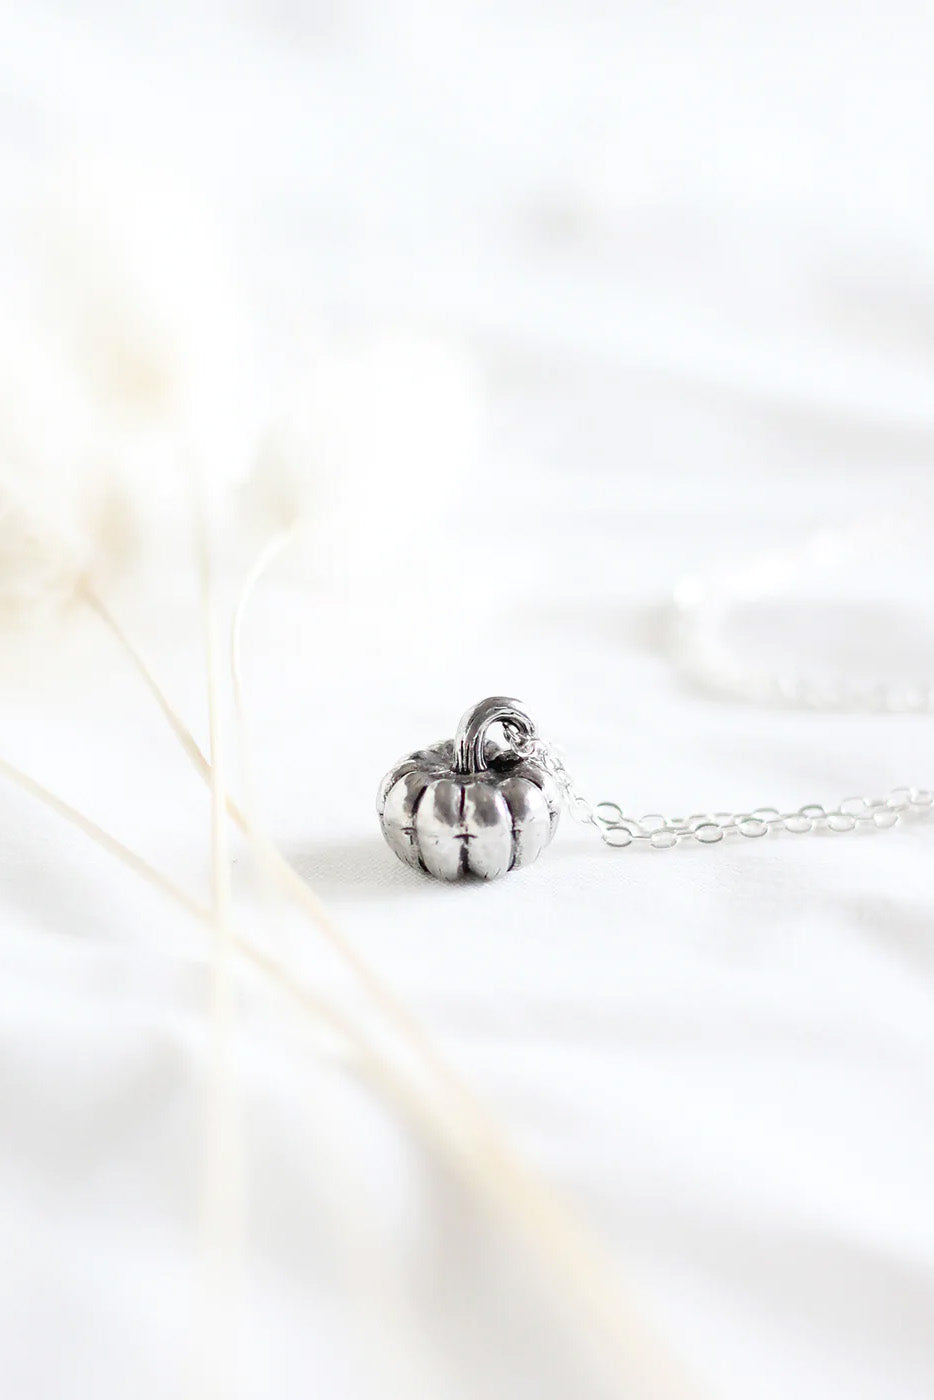 Pumpkin Necklace by Birch Jewellery, silver-plating, made in Ottawa